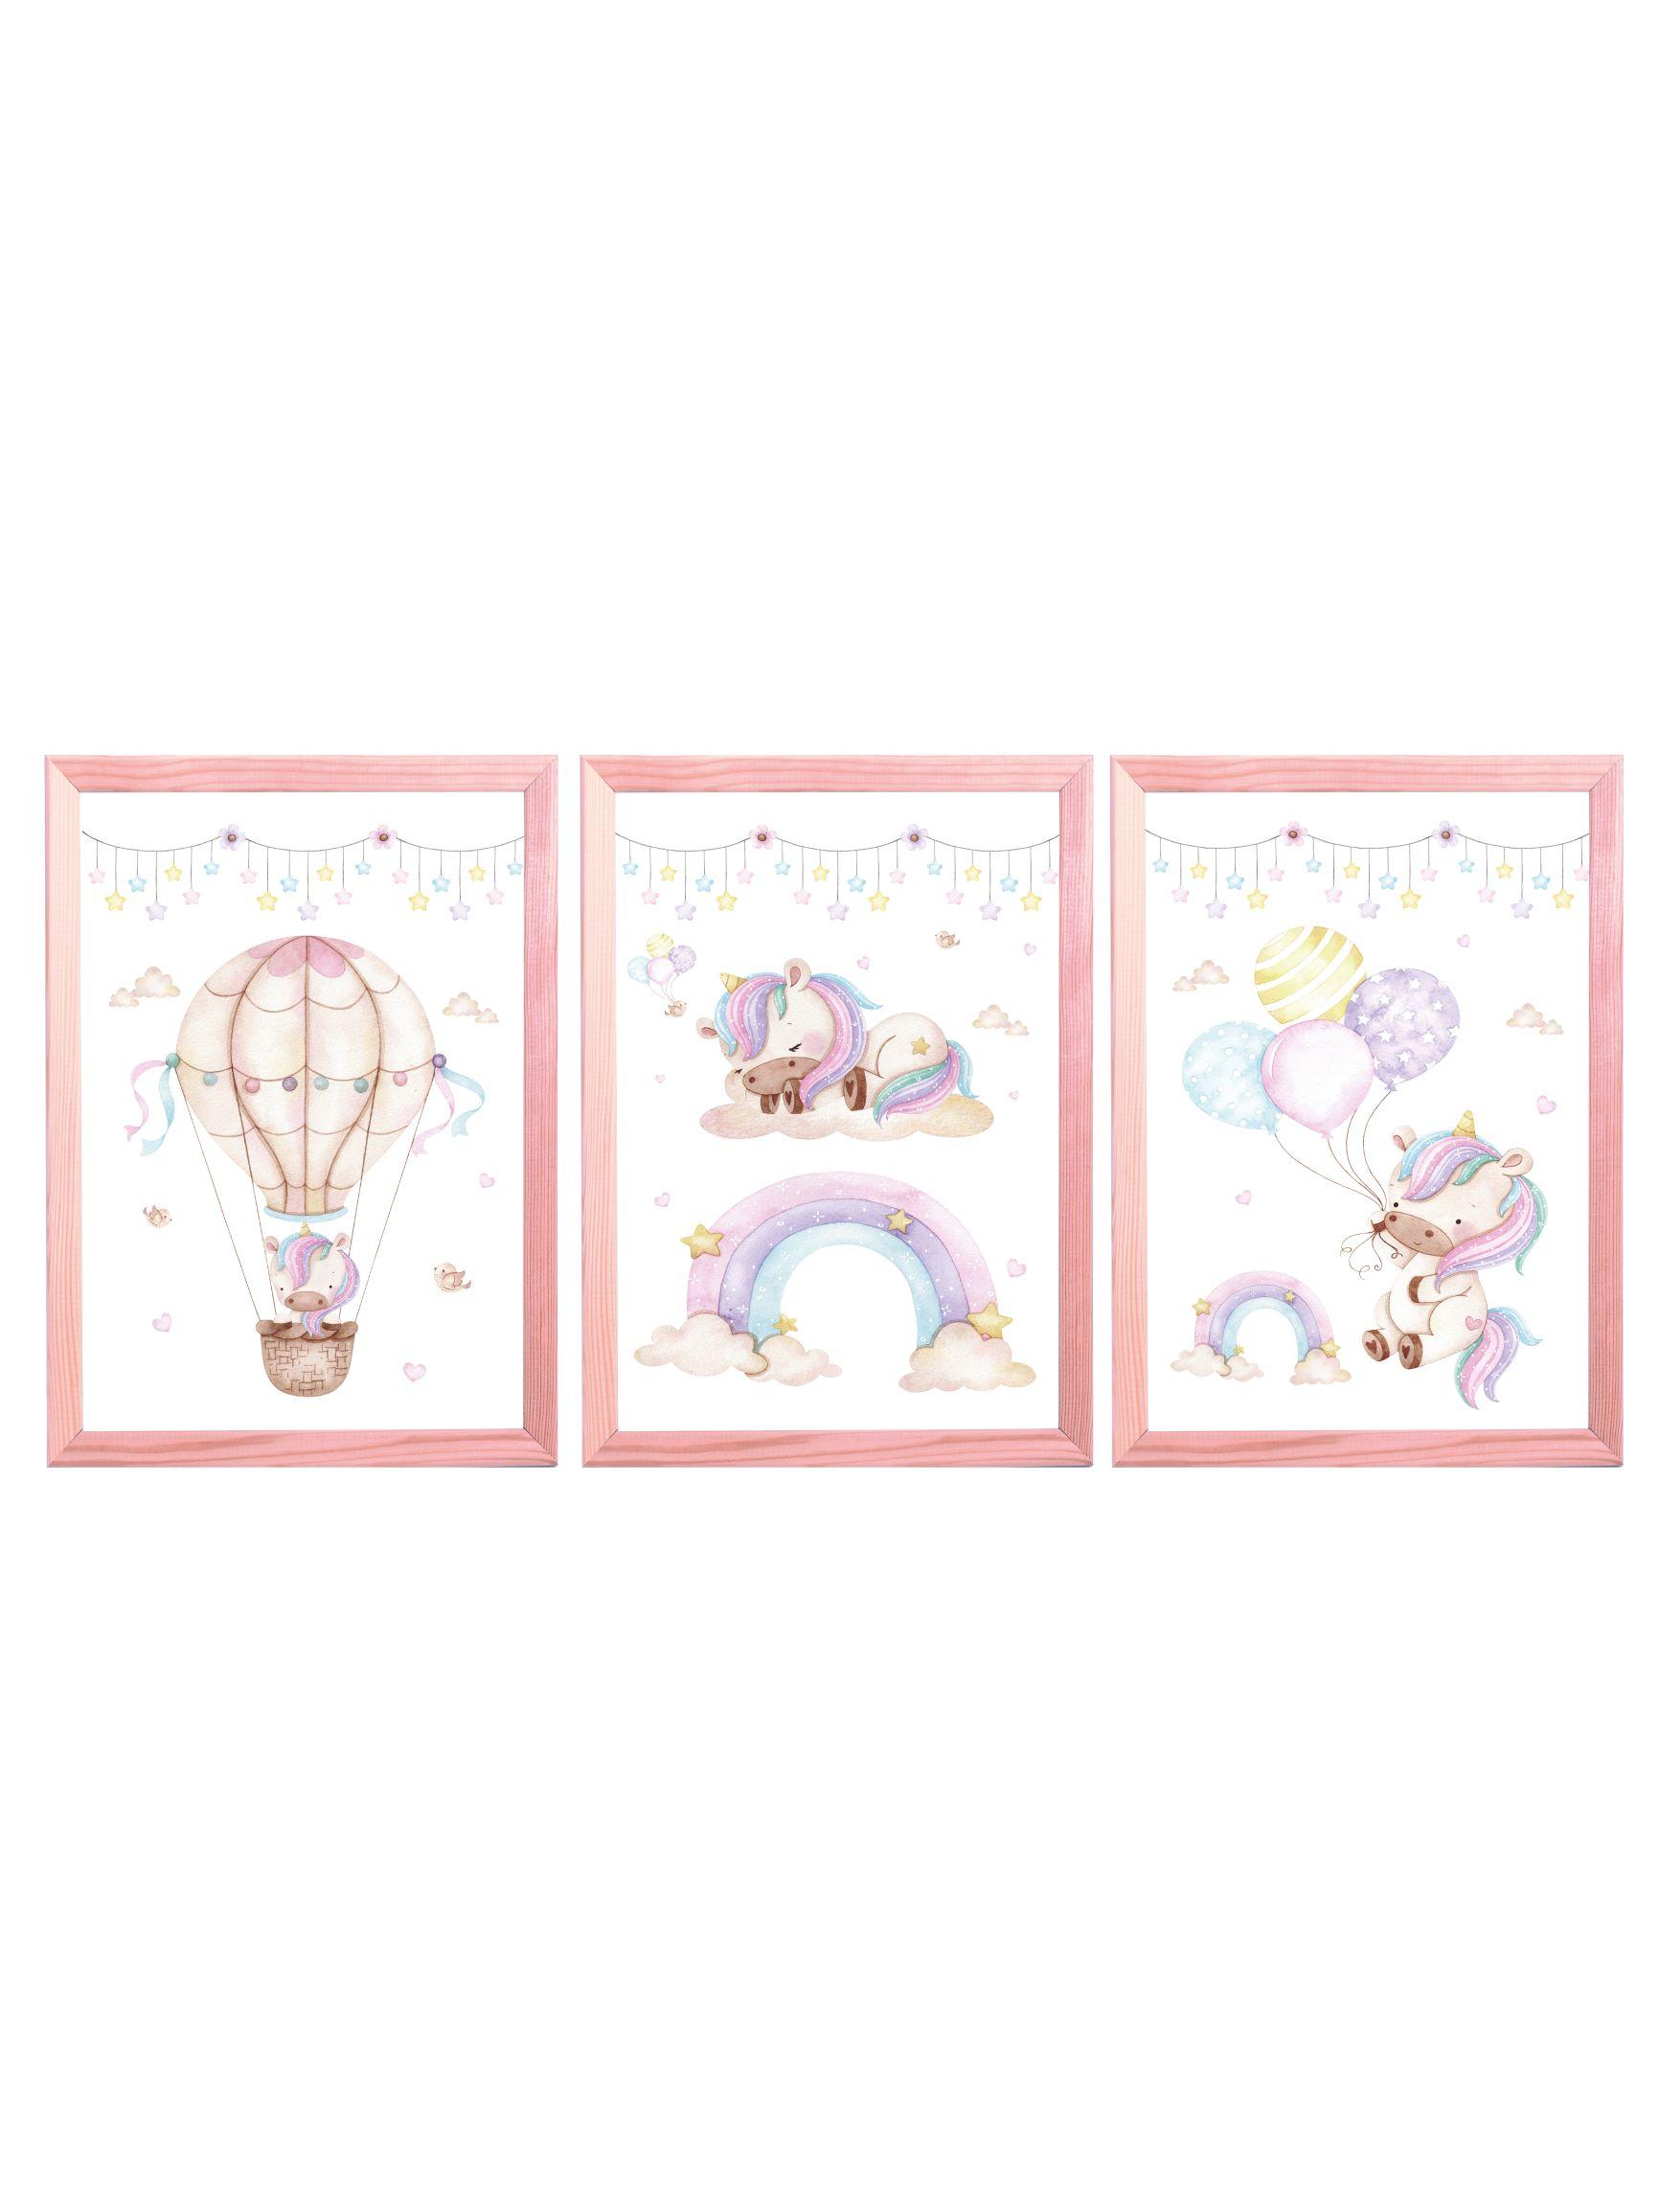 Set of 3 Watercolour Unicorn Prints,Perfect For A Unicorn Themed Bedroom, Nursery or Playroom